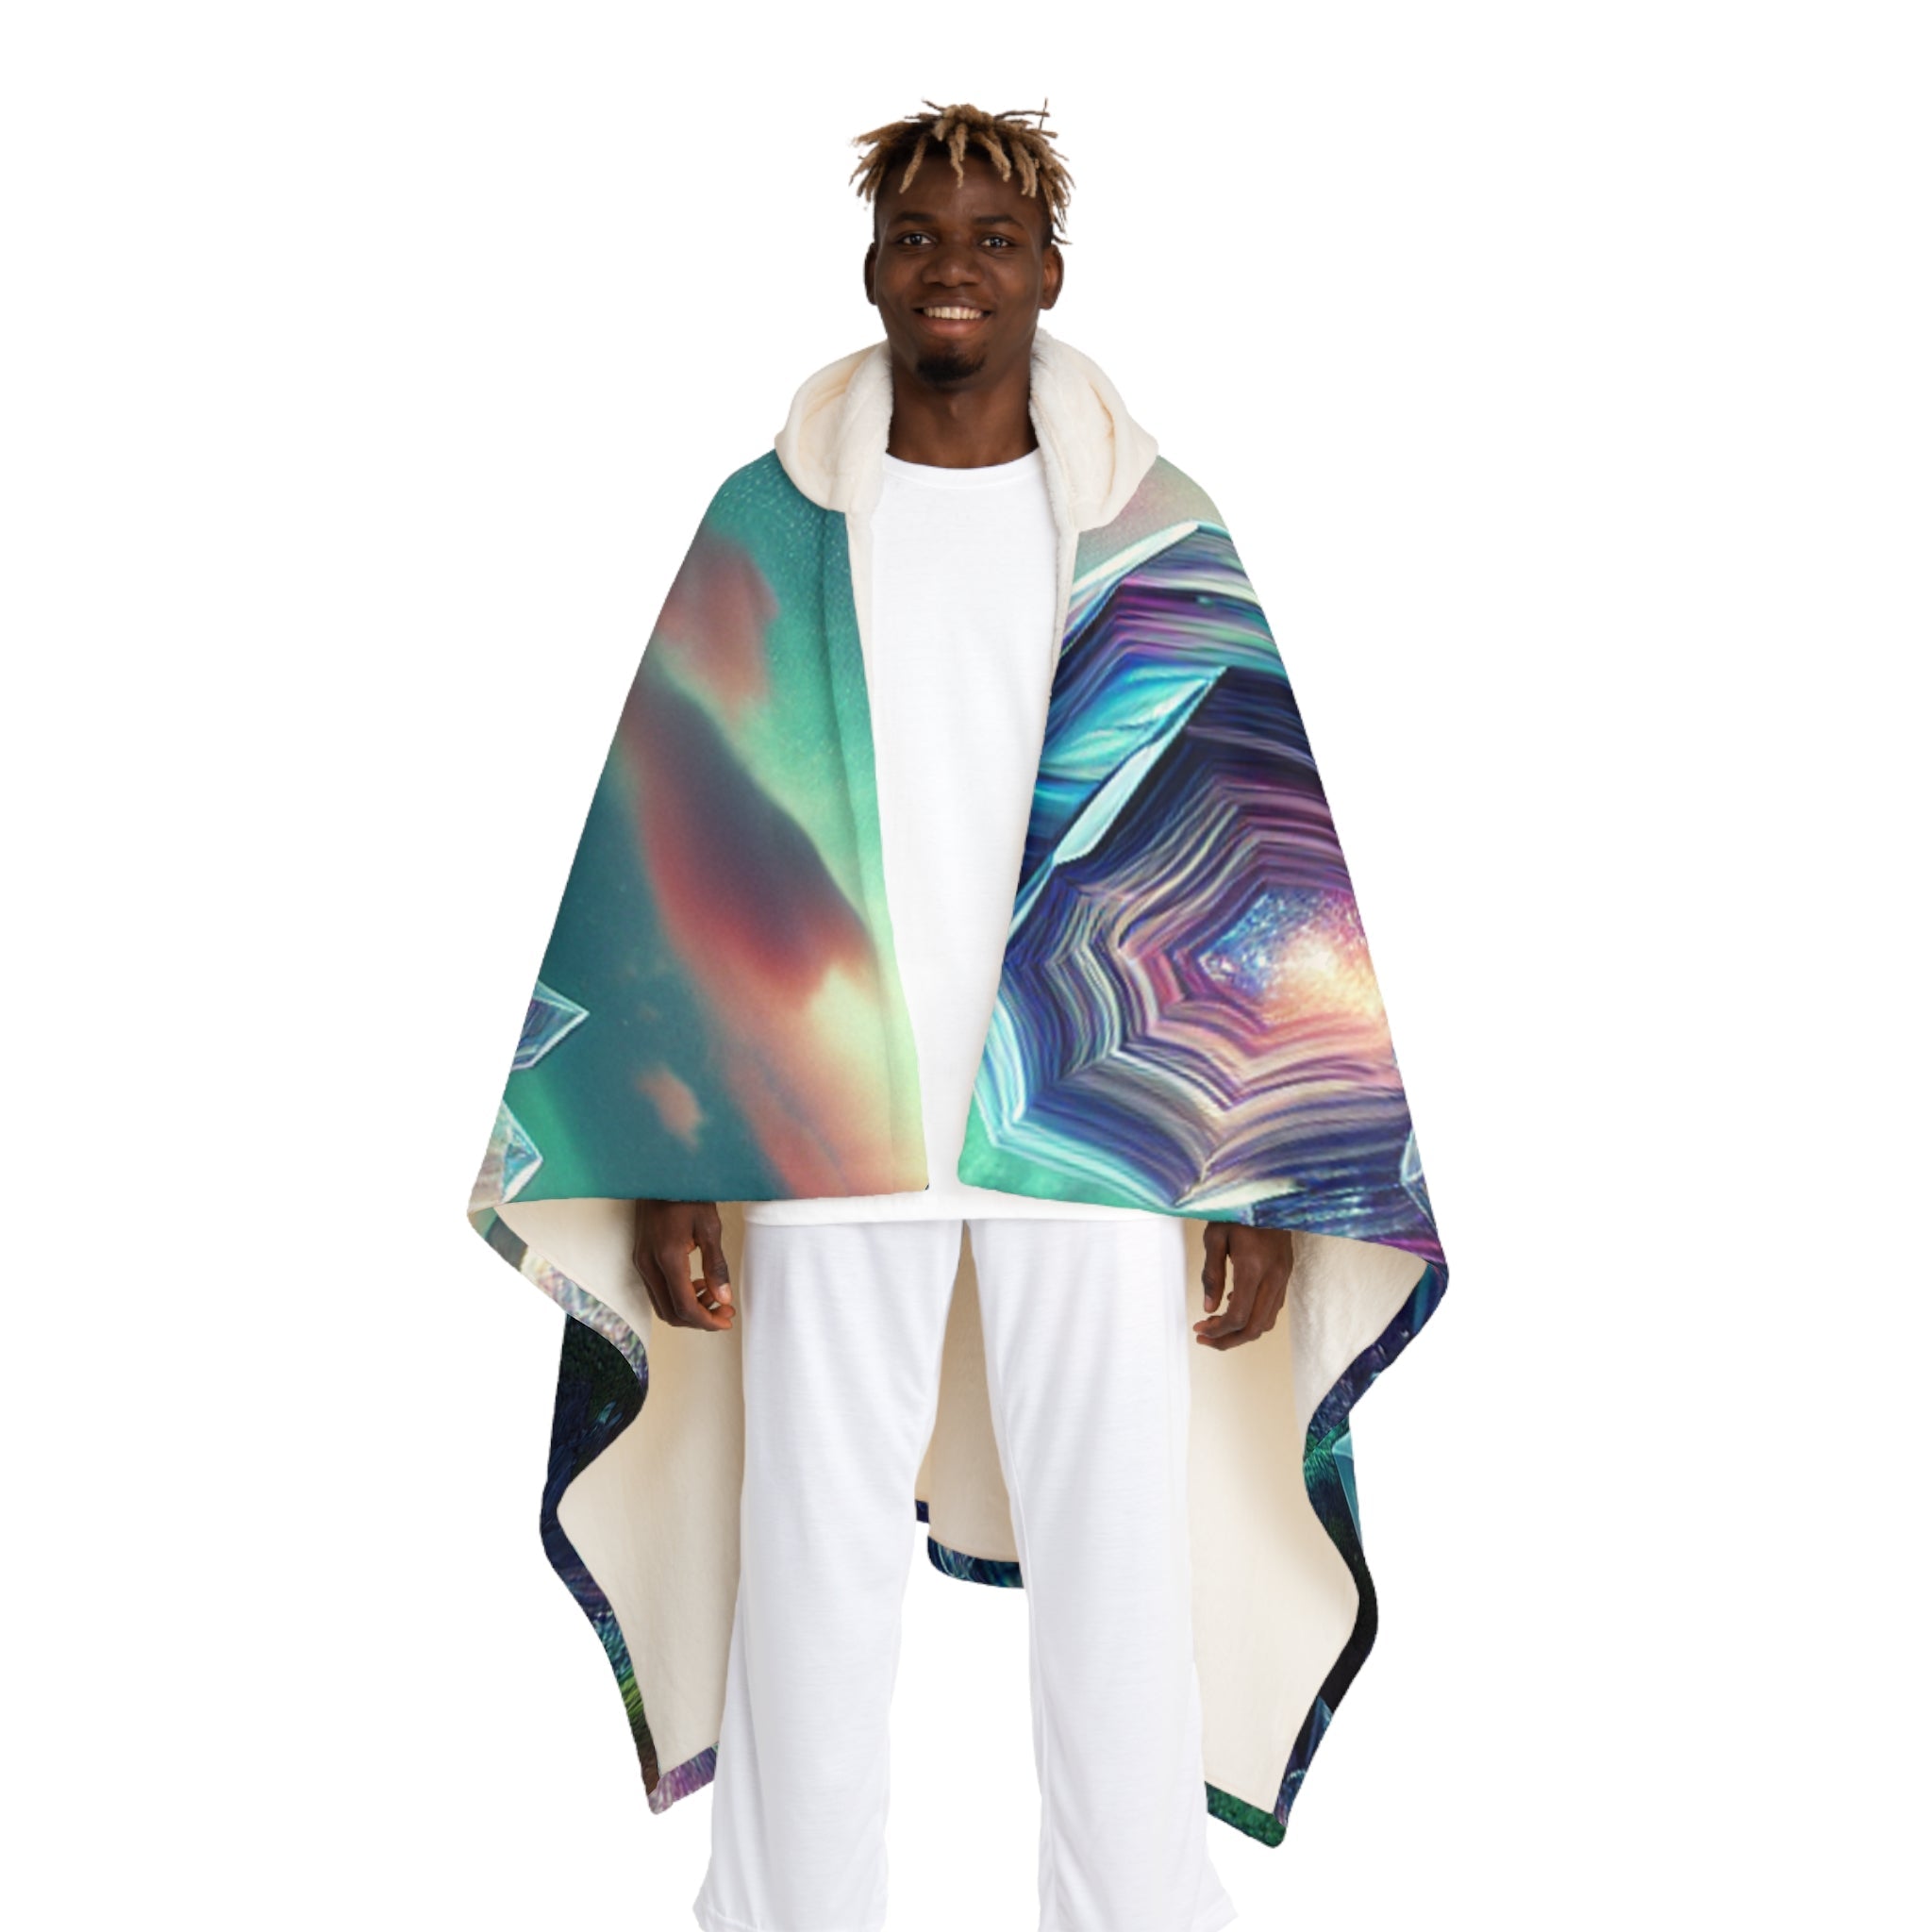 ’Enchanted Prism Radiance - Magical Hooded Sherpa